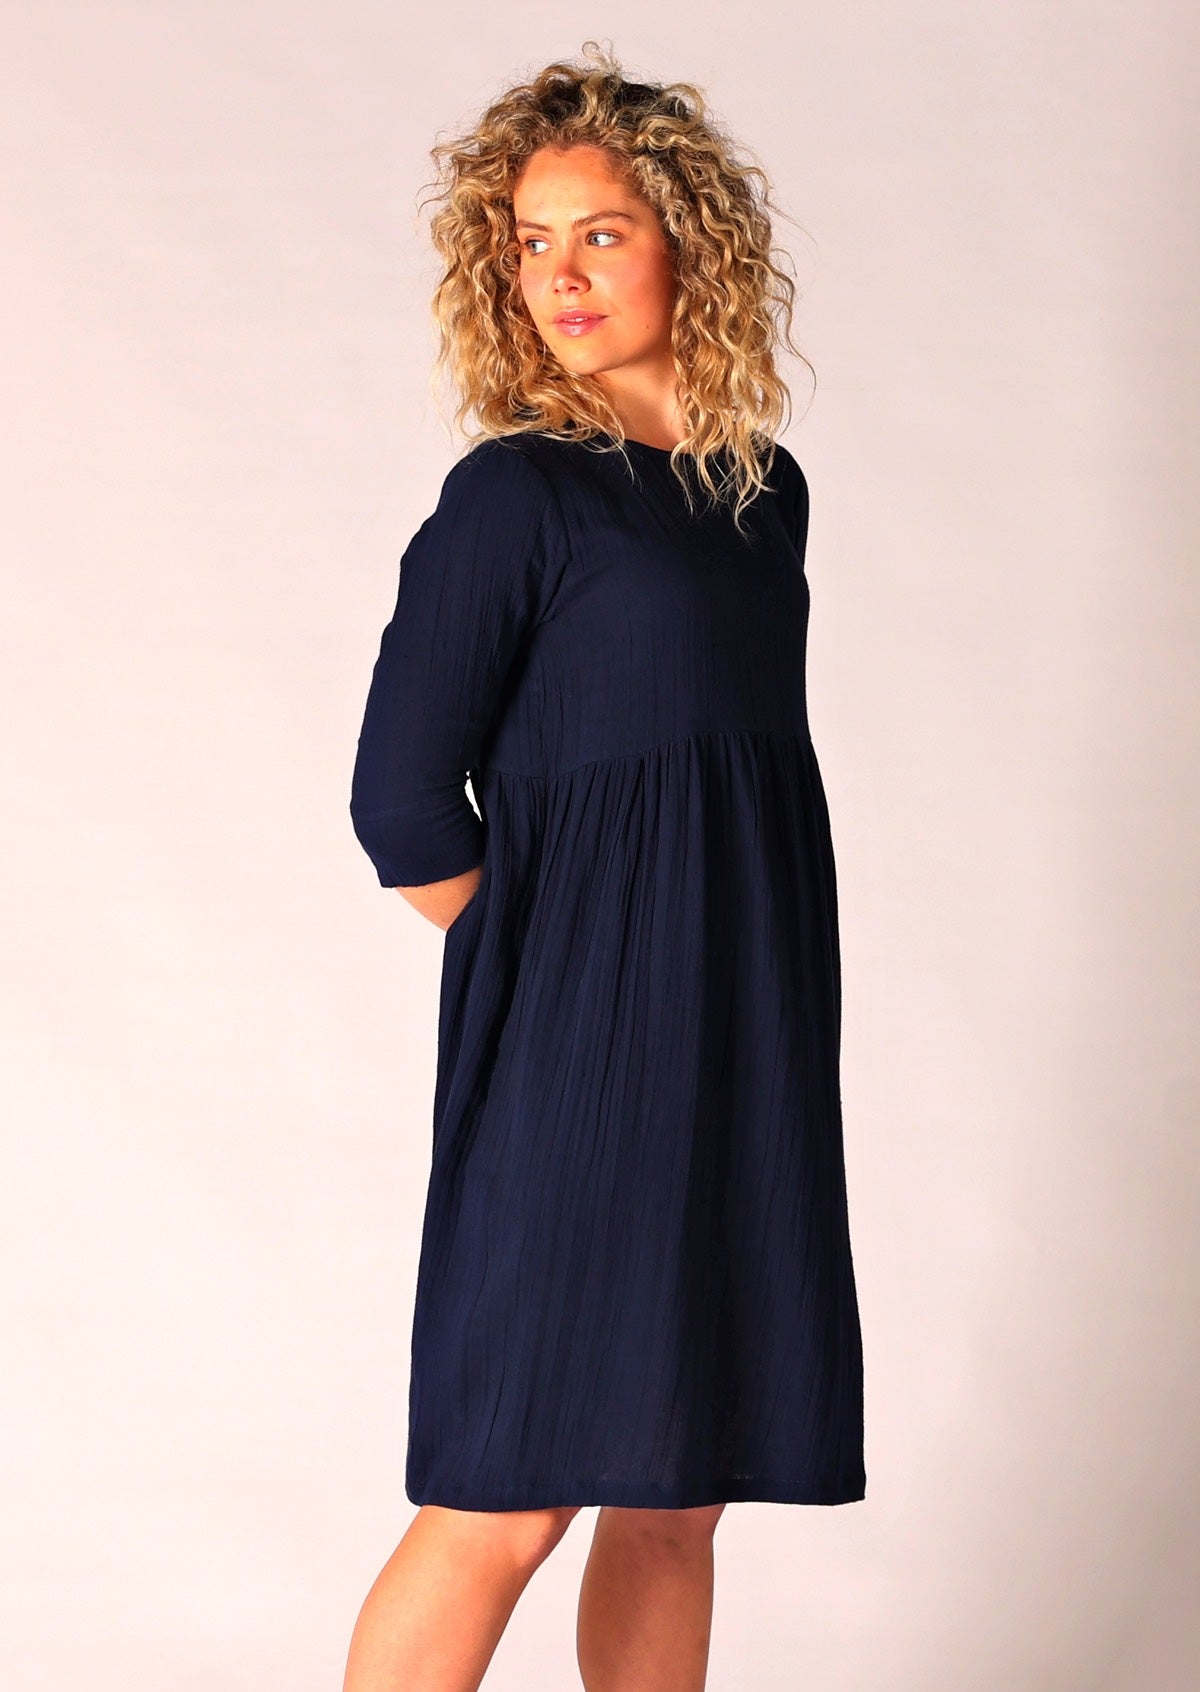 Loose fit double cotton dress in dark blue with 3/4 sleeves with cuff detail